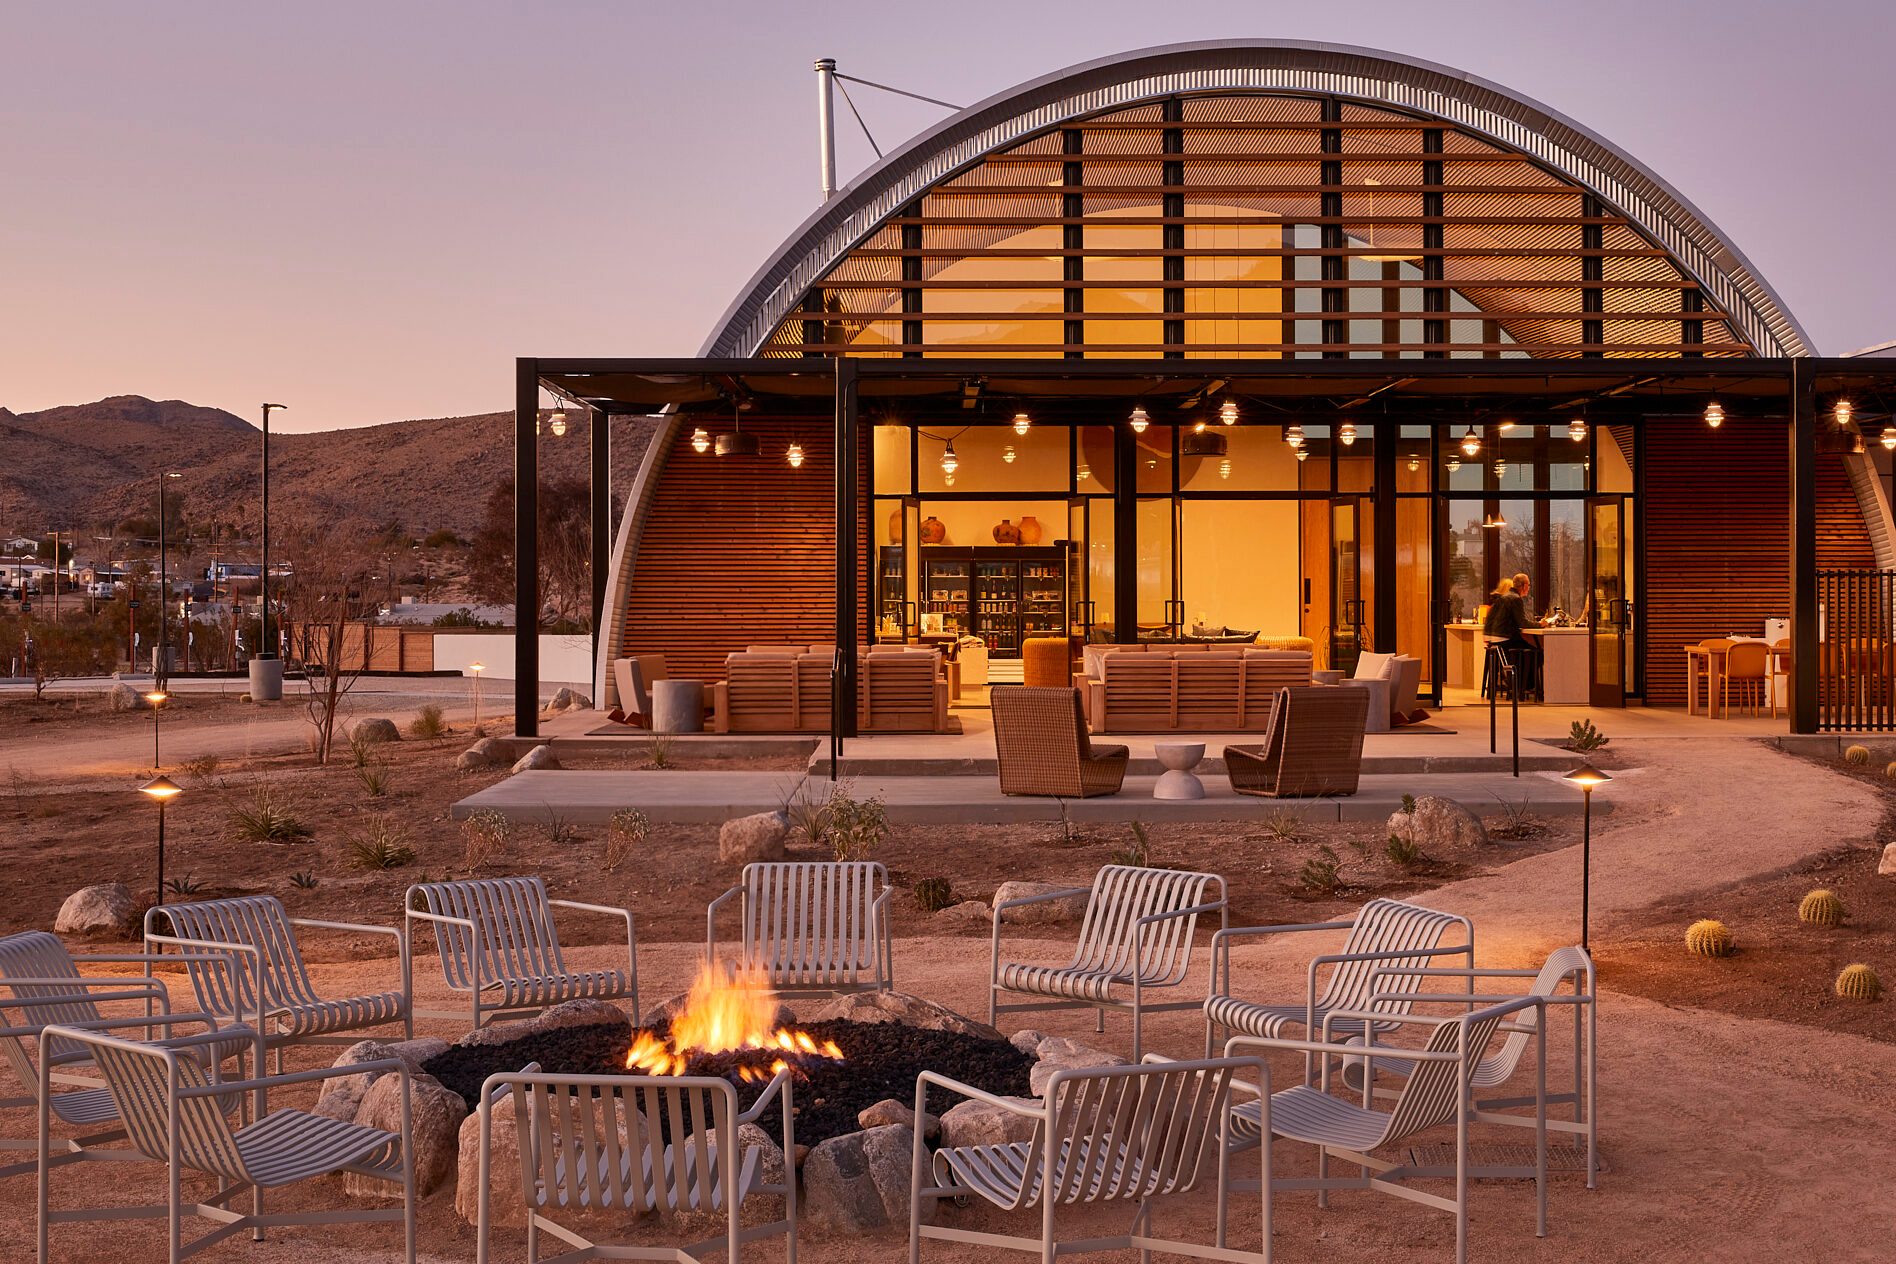 <p>This trusted luxury-camping brand runs six glamping sites in four states, with three more set to open by 2024. Many of its finest camps are within a stone's throw of a national park like Yellowstone, Zion or <a href="https://autocamp.com/joshua-tree/" rel="noopener noreferrer">this outpost</a>, which opened in 2022 in the high desert less than 10 miles from Joshua Tree National Park.</p> <p>With a swimming pool under the stars, communal fire pits, air conditioning and heating—plus a wide selection of craft beer, wine and hard kombucha (which pair well with the cafe's chicken pot pie) to warm your insides—this spot is a four-season stay.</p> <p>Each Airstream unit has a toilet and rain shower, which means no midnight walks to the restrooms. They're also tricked out with memory-foam mattresses, an outdoor dining area with a personal fire pit, a TV and coffee from a premium indie roaster. There are a few ADA-compliant units available too.</p> <p class="listicle-page__cta-button-shop"><a class="shop-btn" href="https://autocamp.com/joshua-tree/">Book Now</a></p>